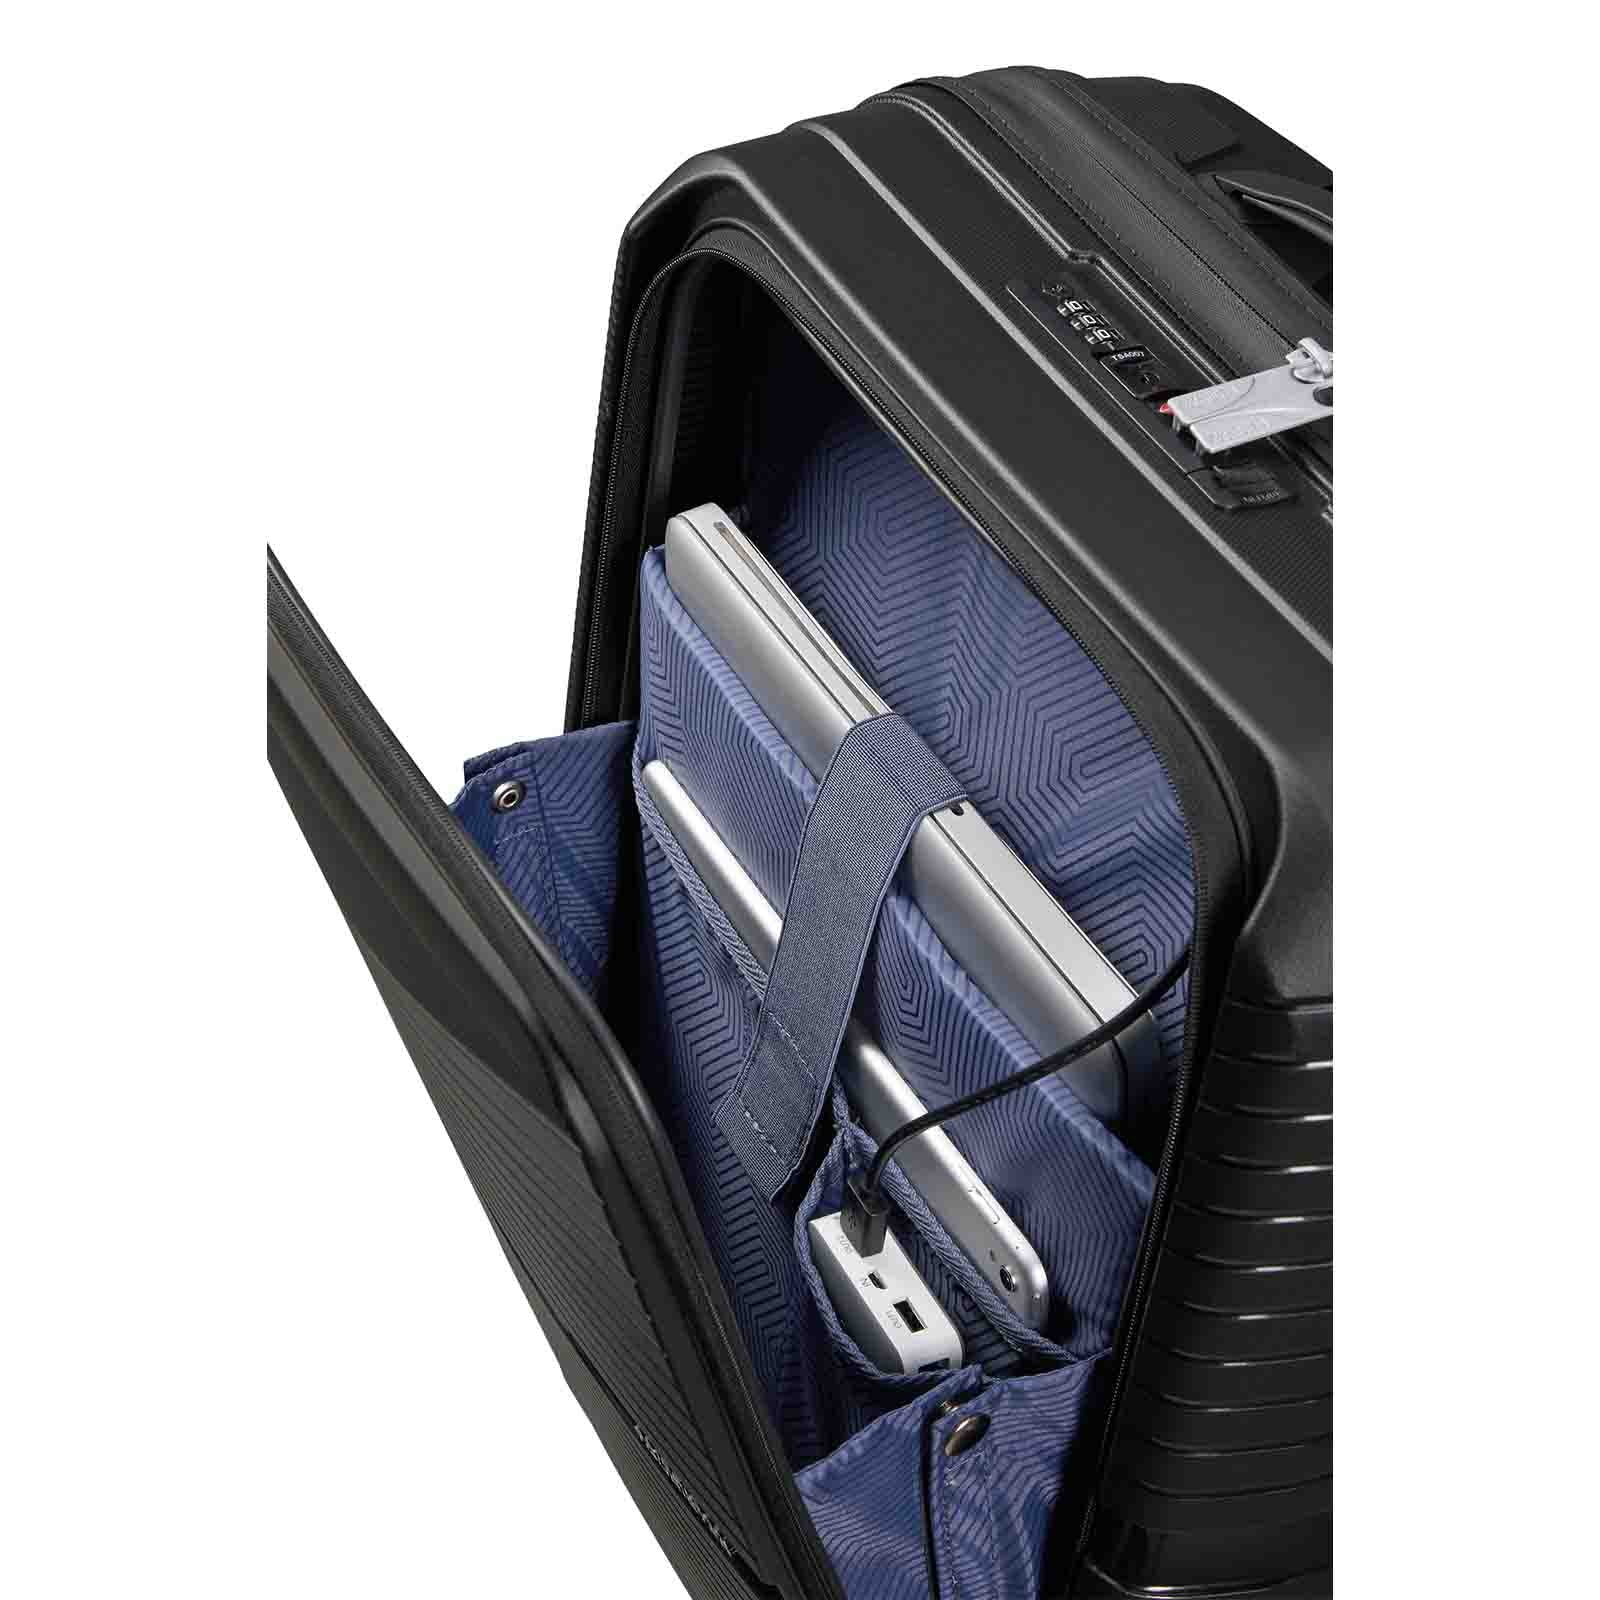 American-Tourister-Airconic-55cm-Suitcase-Front-Opening-Onyx-Black-Laptop-Pouch